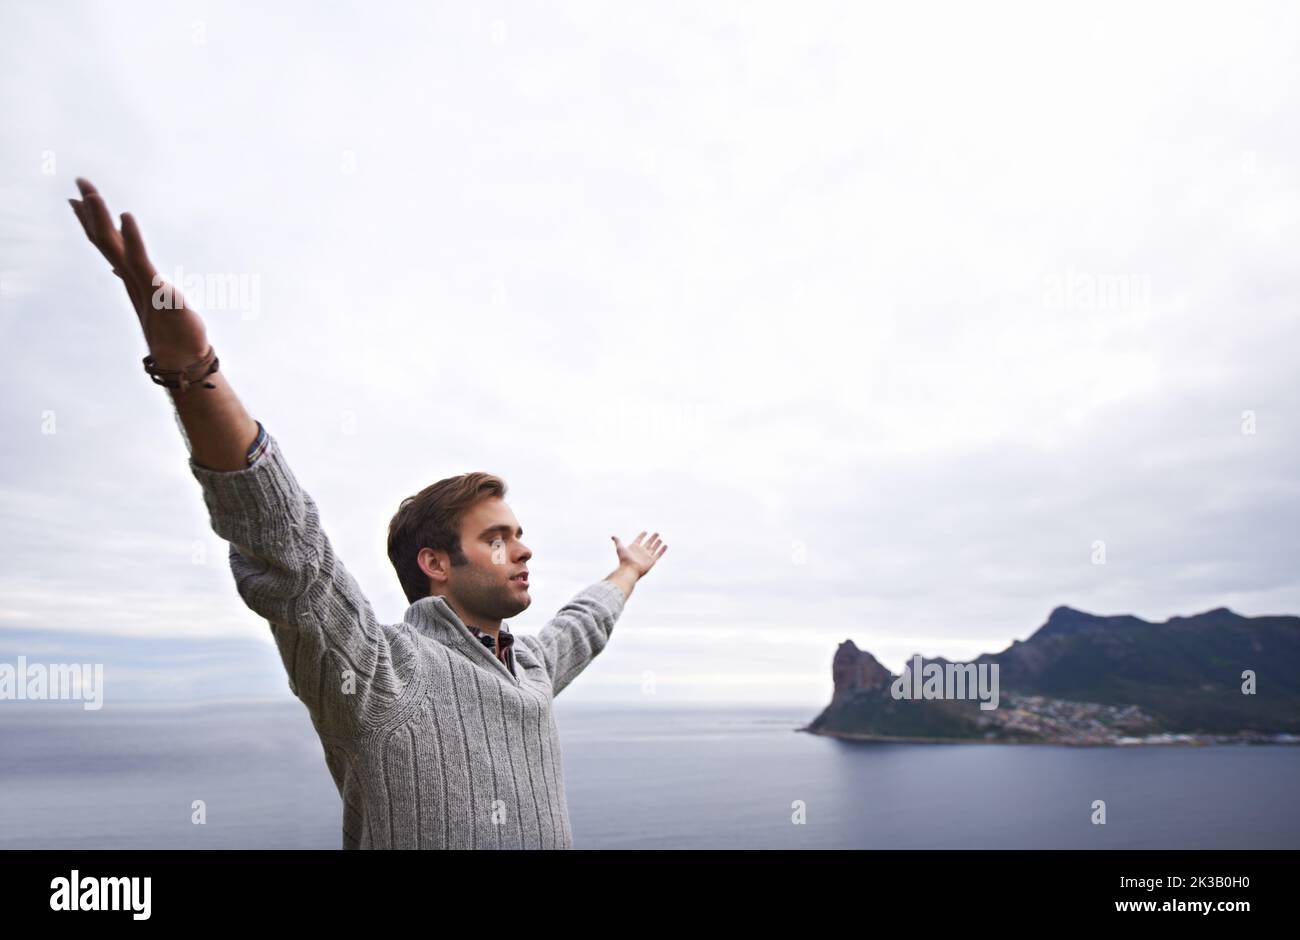 Basking in natures glory. A young man standing with his arms raised against an ocean view. Stock Photo